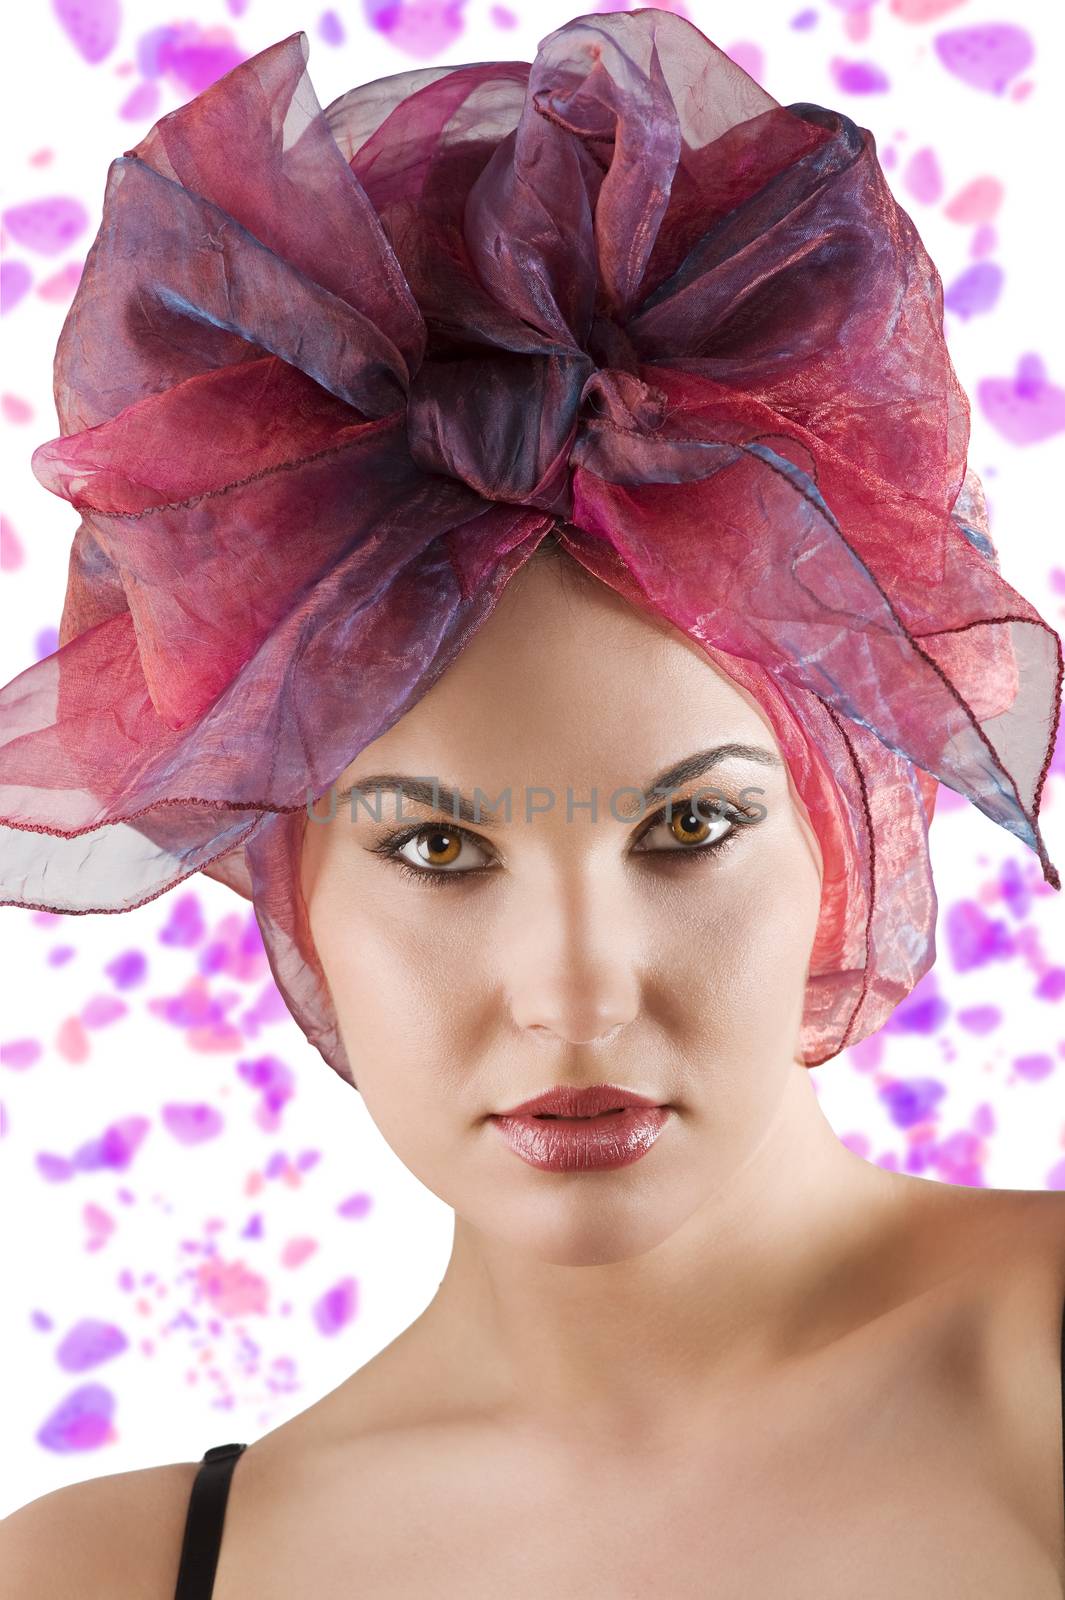 close up portrait beautiful woman with a colored headscarf looking like a brasilian girl